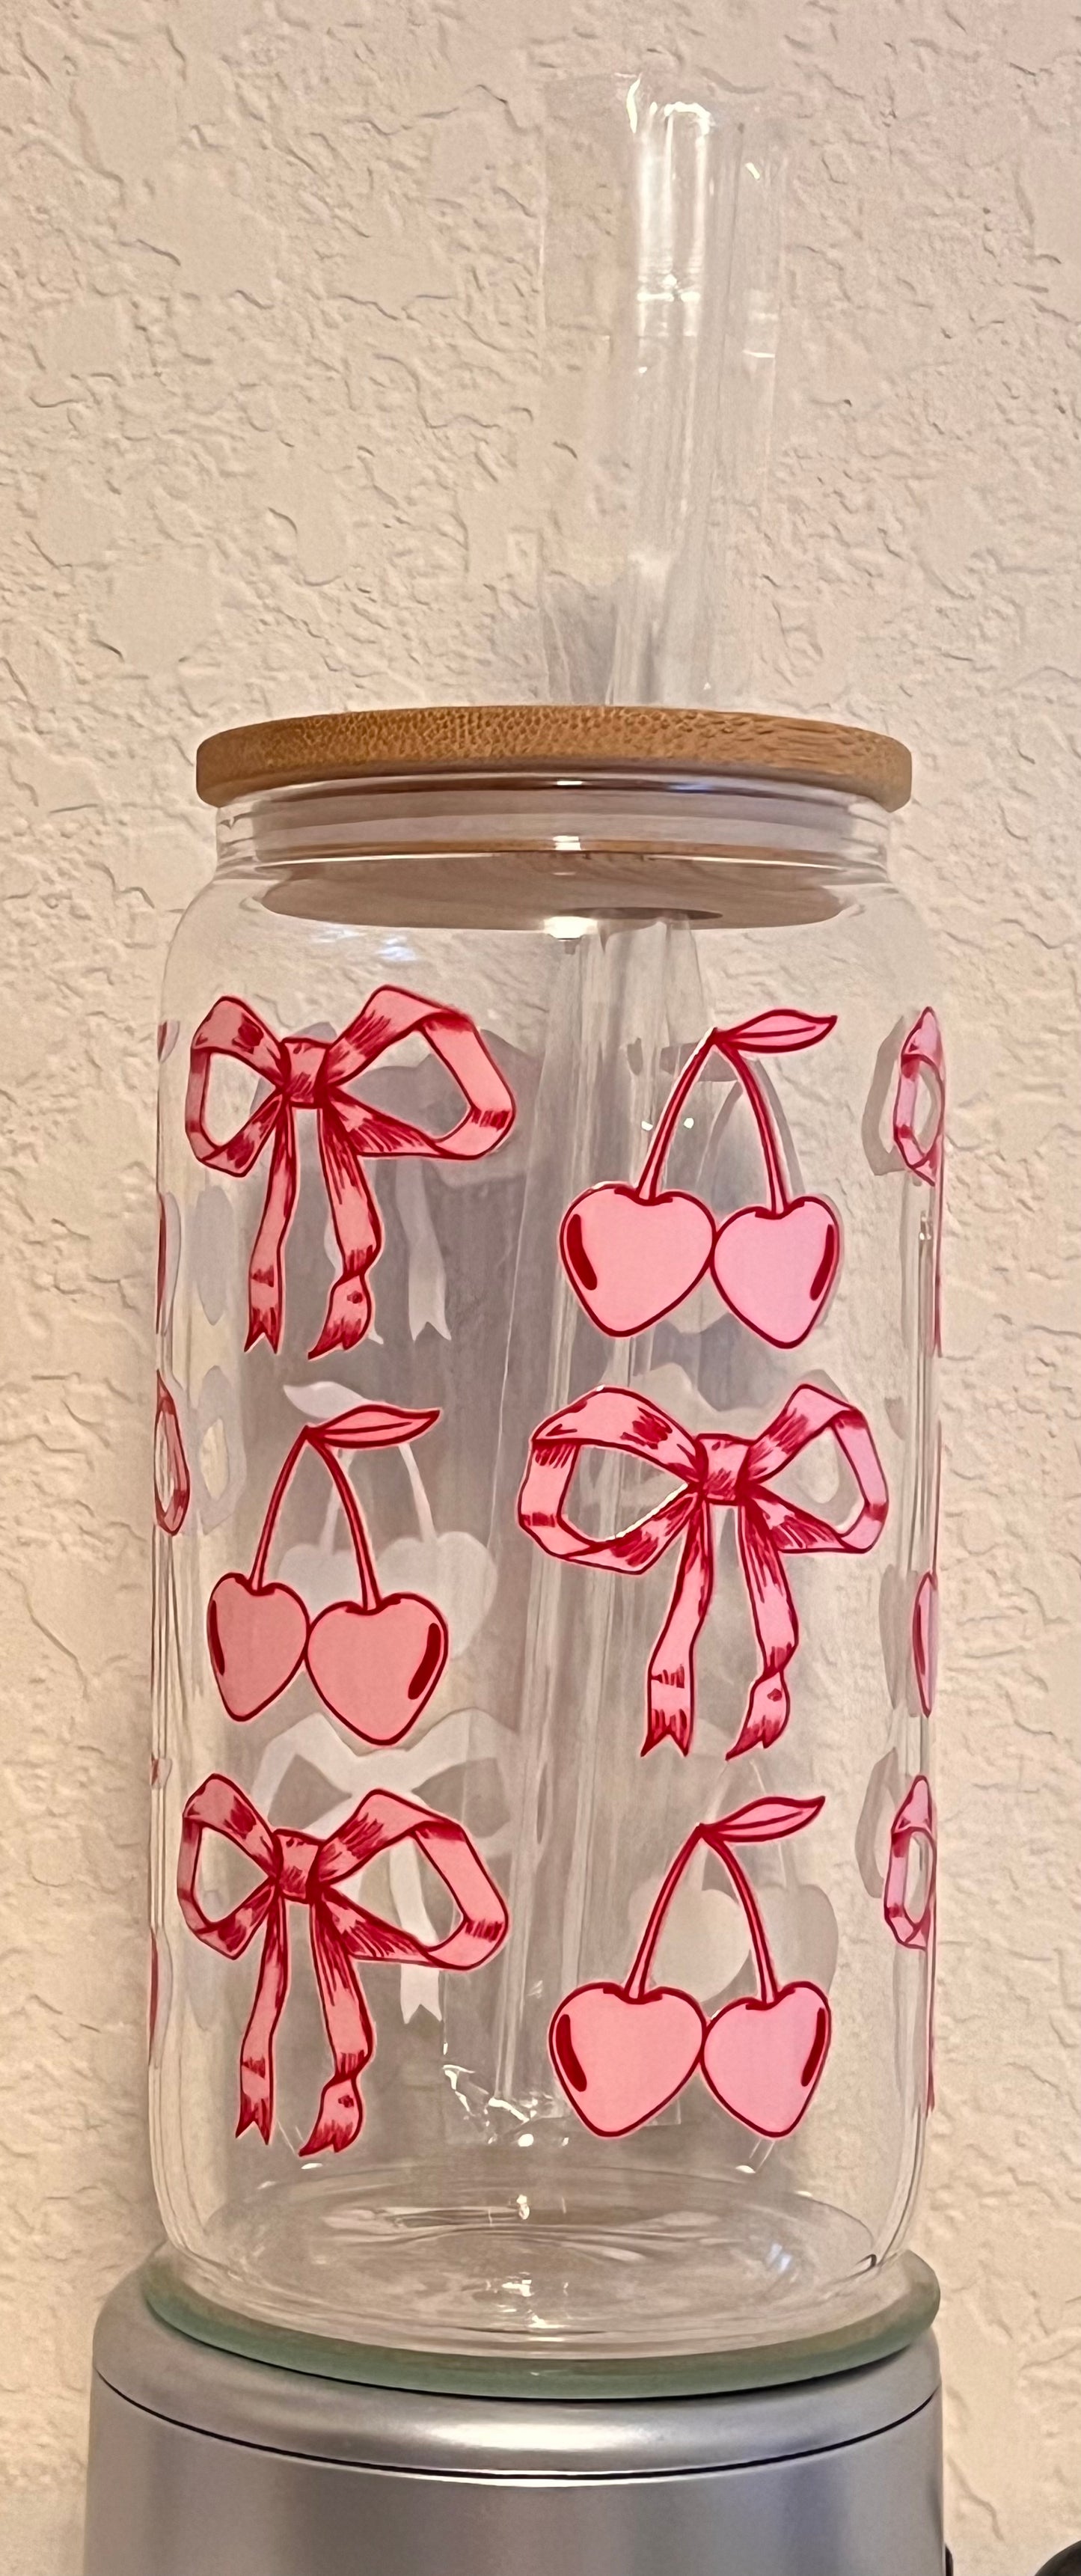 Bows 🎀 and cherries 🍒 hearts ❤️ glass cup